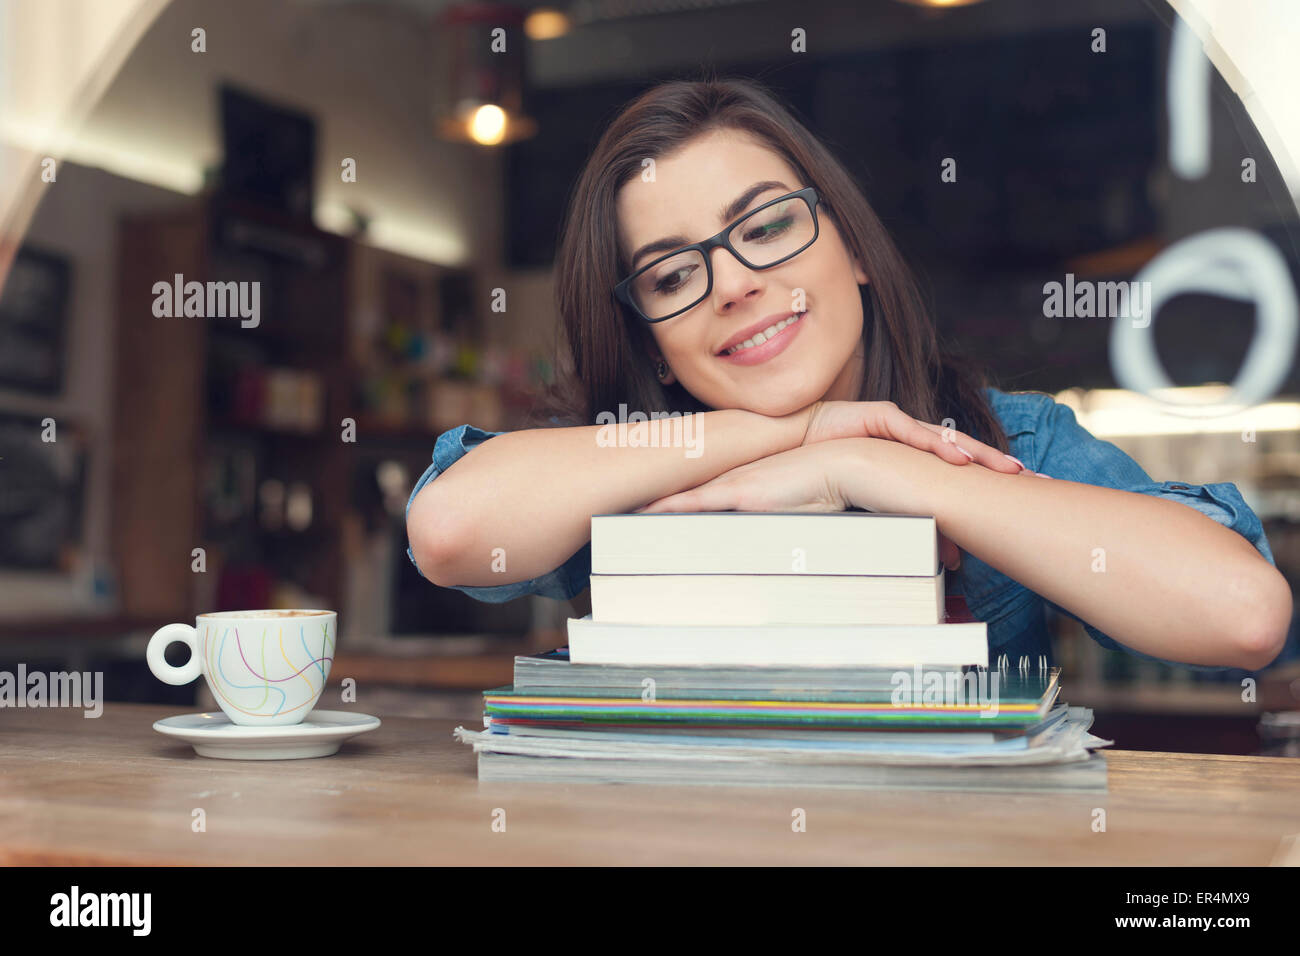 Dreaming and smiling female student at cafe. Krakow, Poland Stock Photo